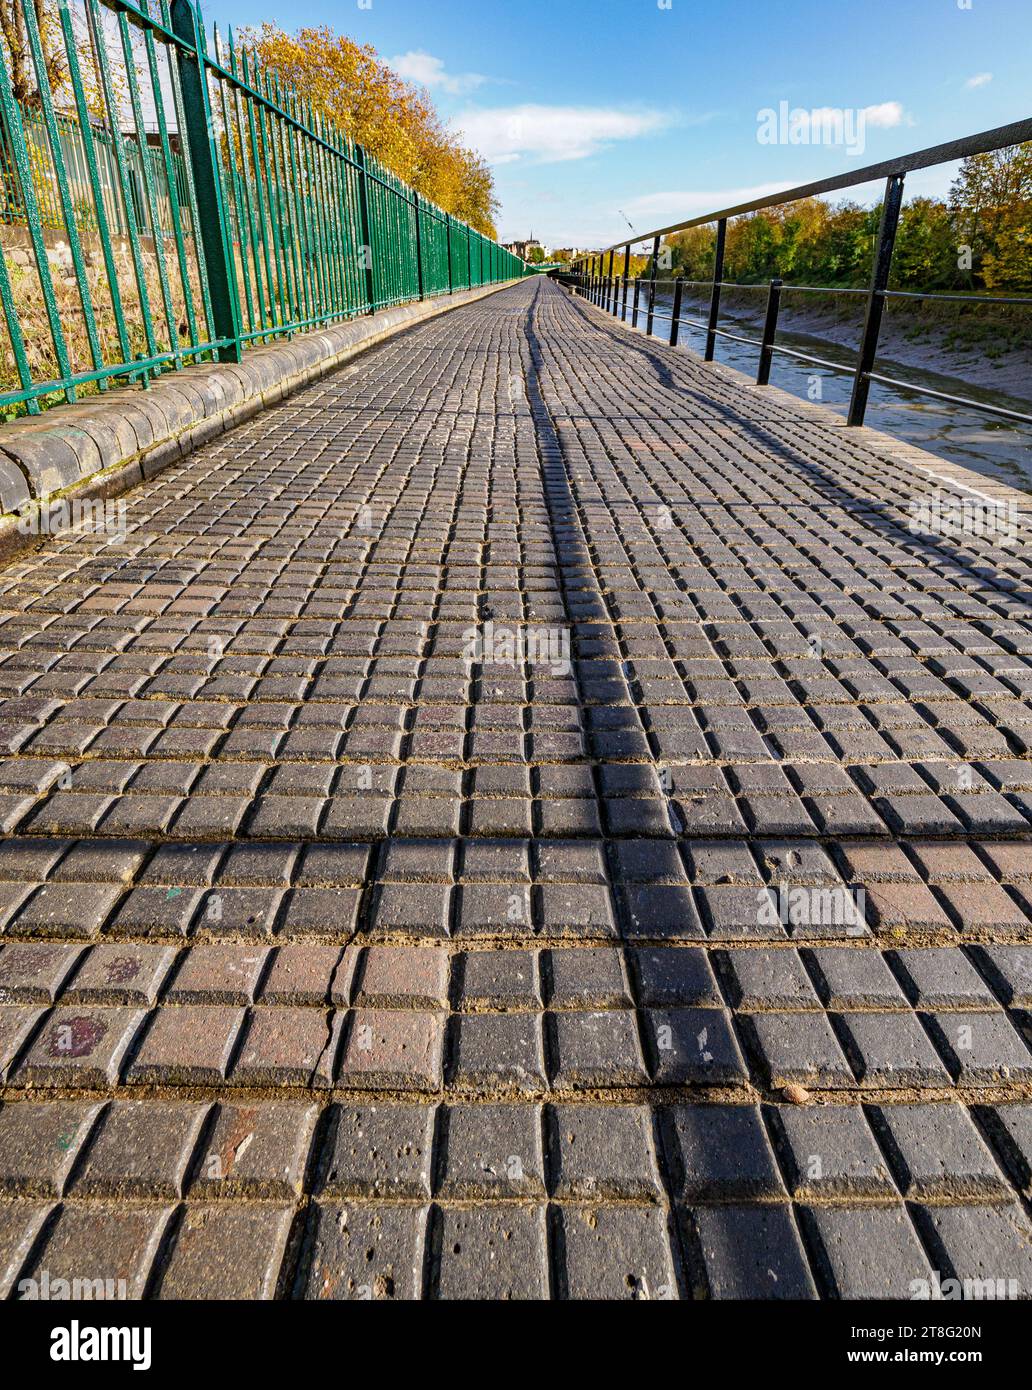 The Chocolate Path by the River Avon New Cut Bristol UK - named after the Victorian engineering brick paving resembling bars of chocolate Stock Photo